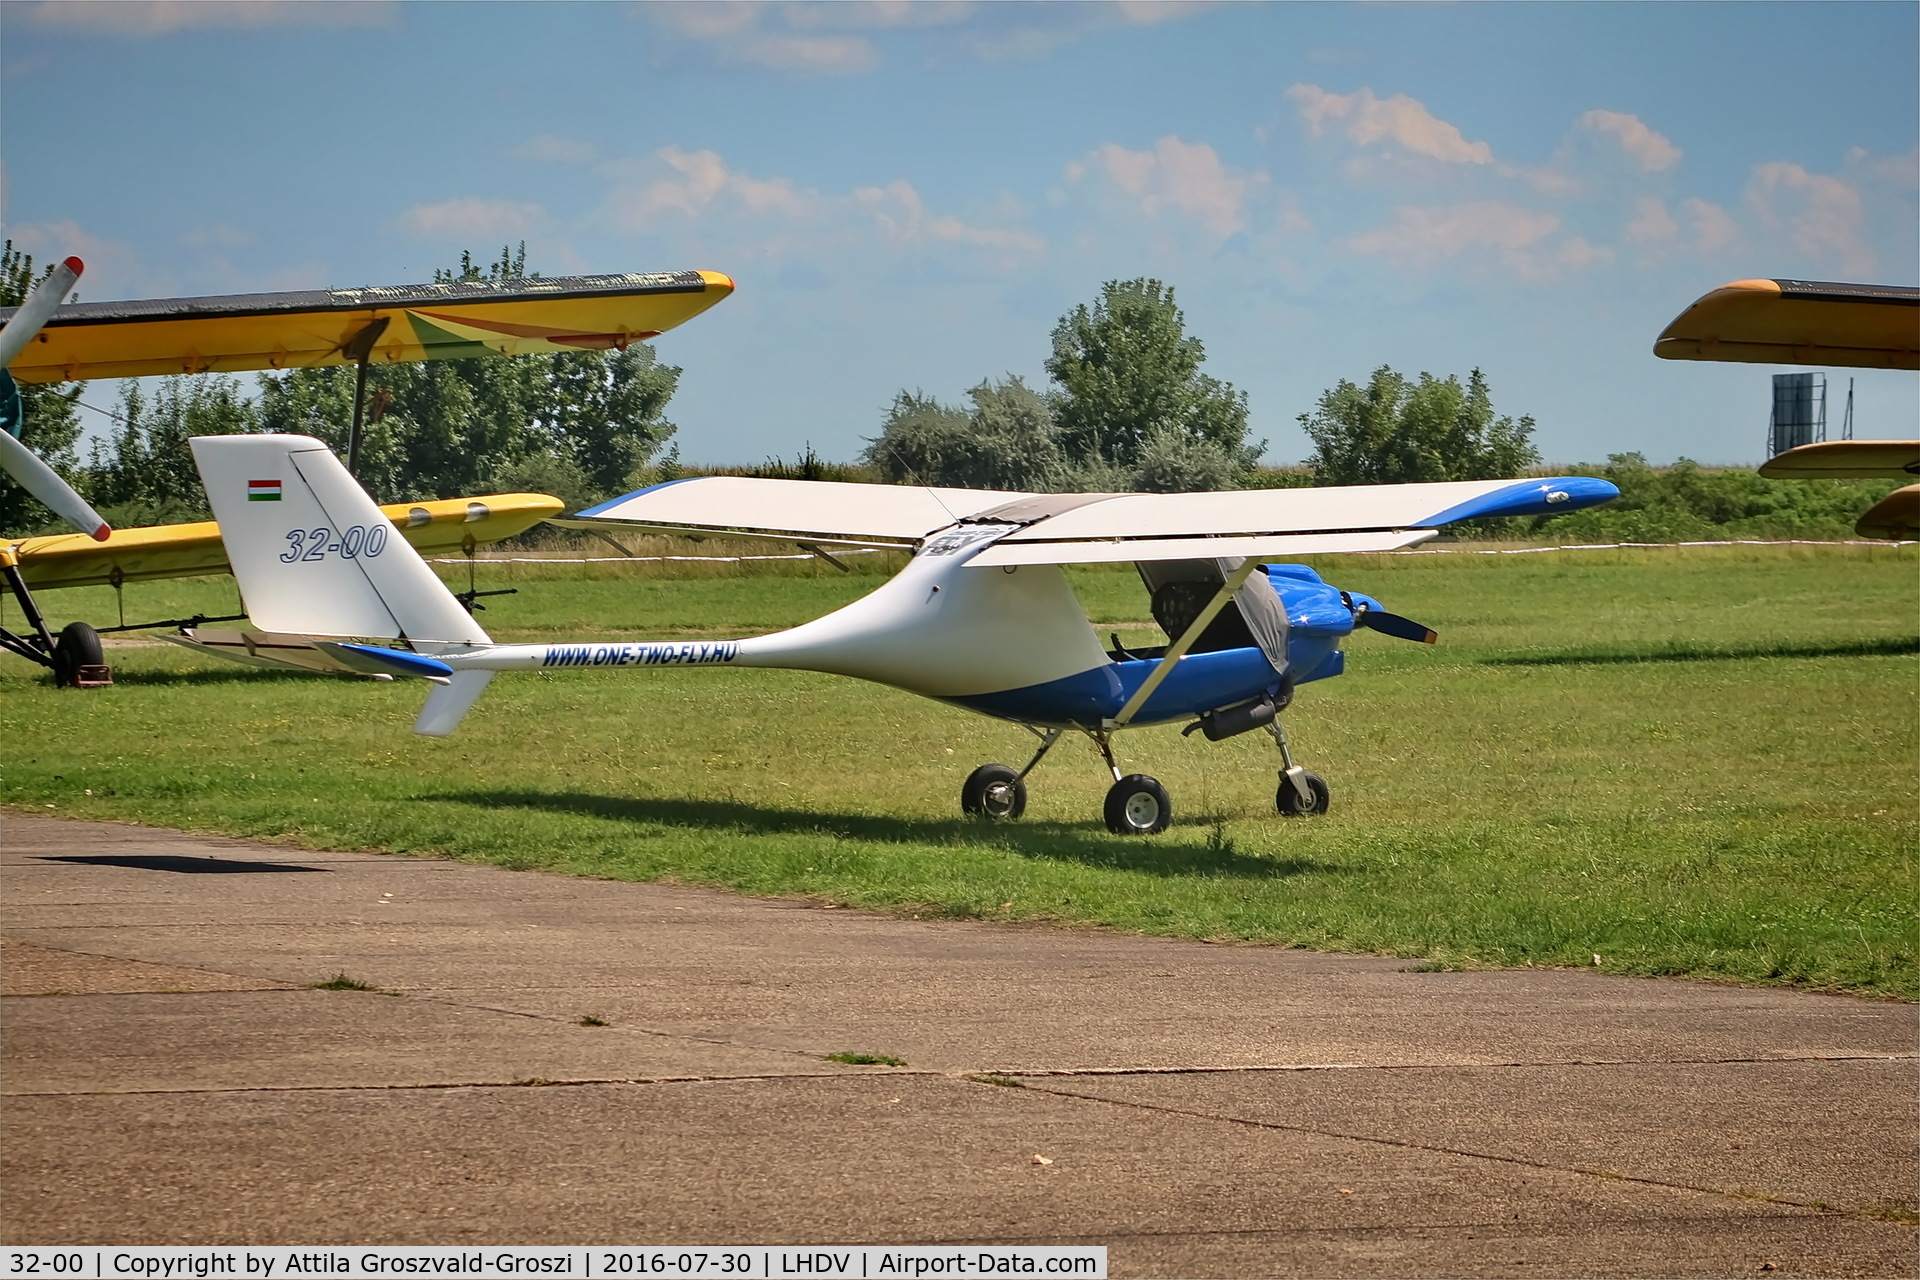 32-00, Fly Synthesis Storch C/N 89, LHDV - Dunaújváros-Kisapostag Airport, Hungary